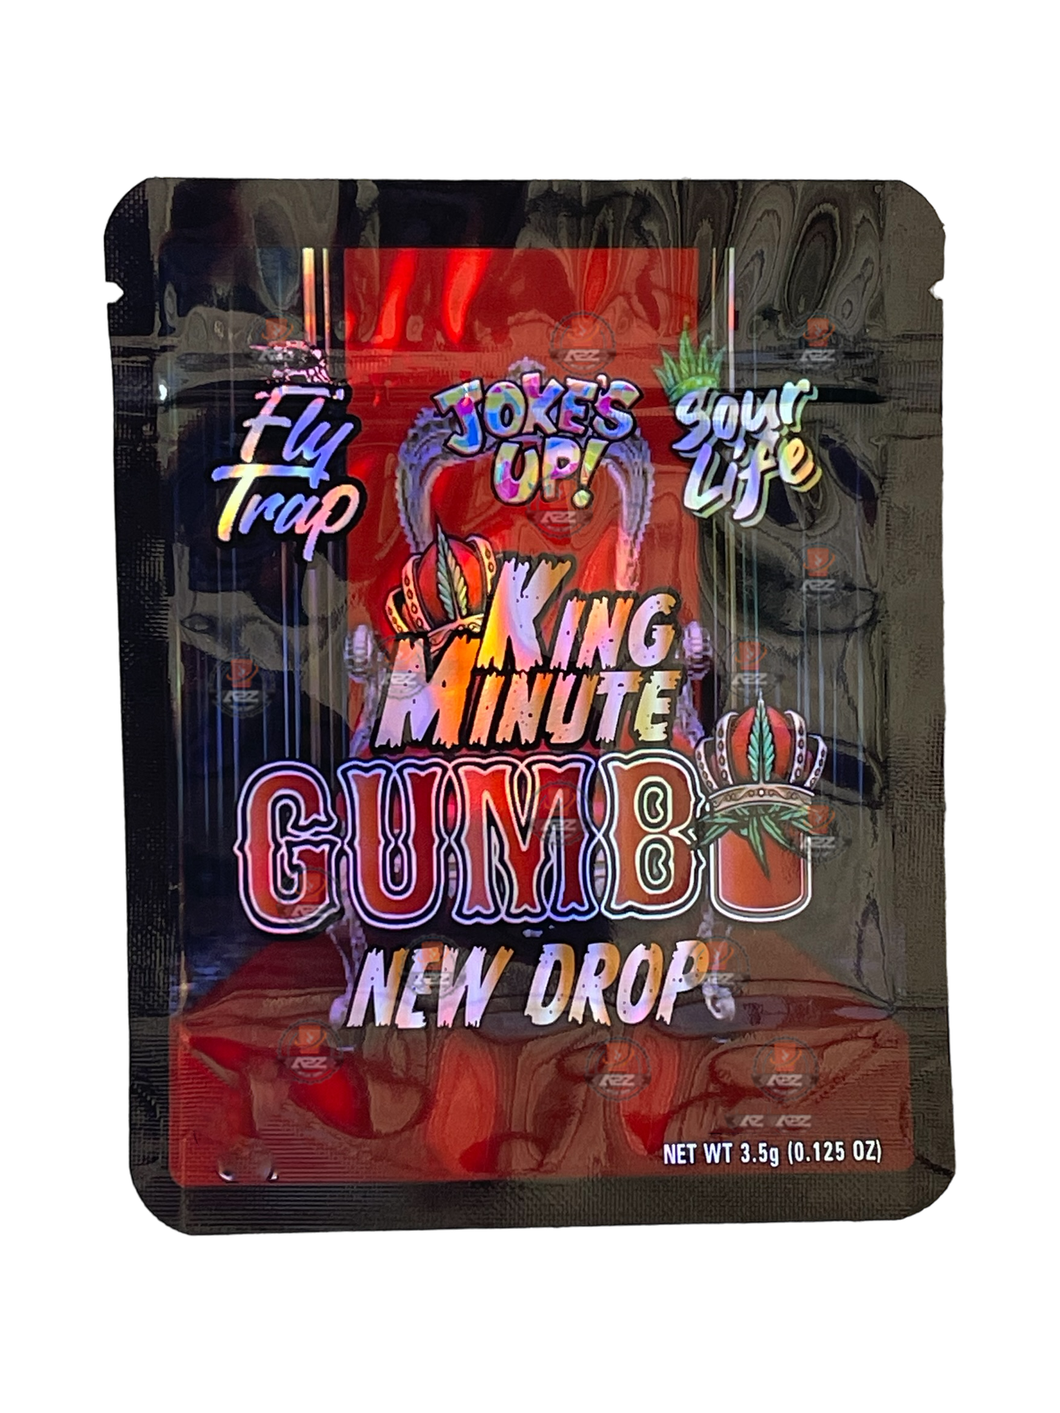 King Minute Gumbo New Drop 3.5g Mylar Bag Holographic Jokes Up